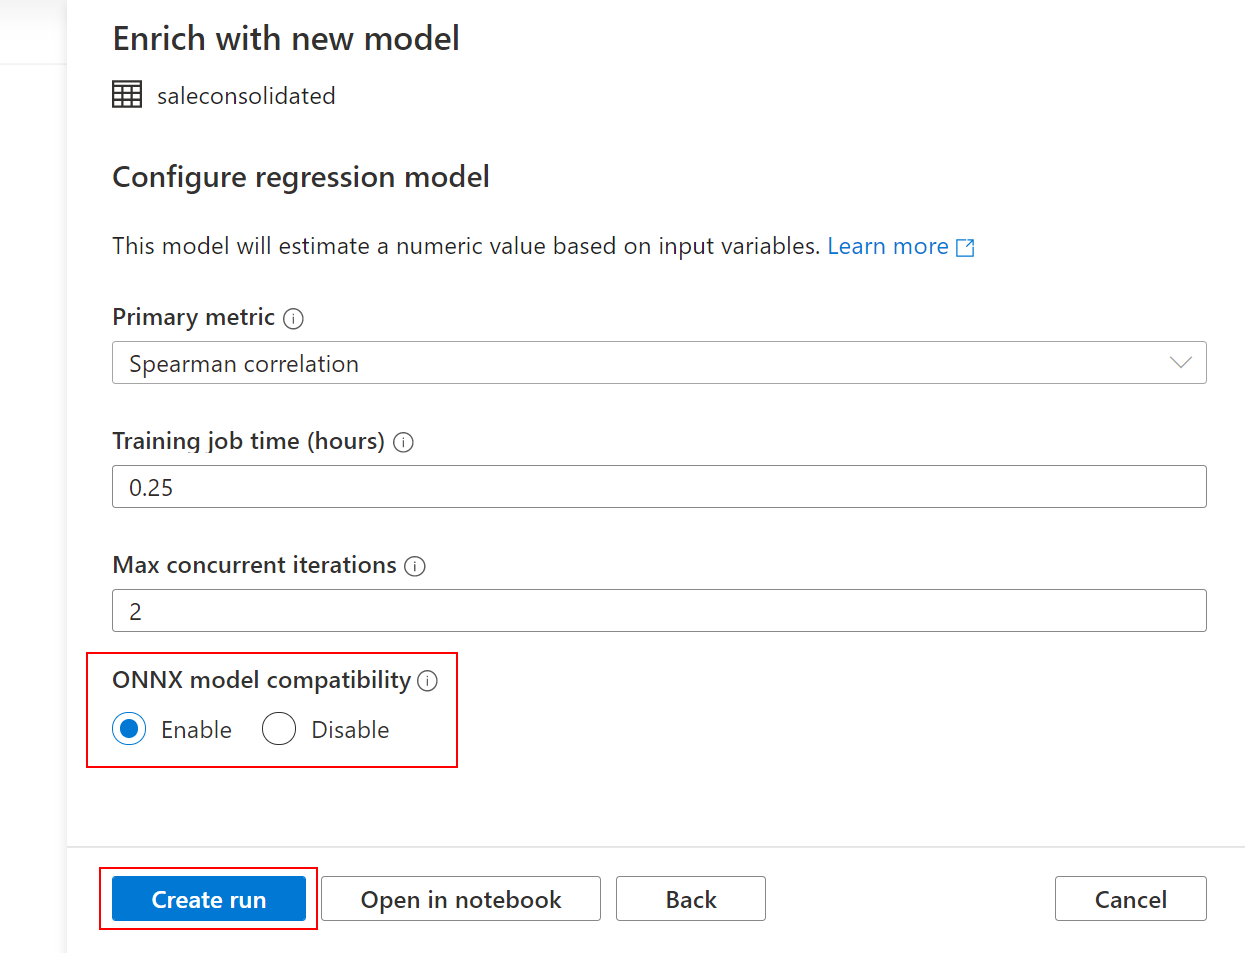 Enrich with new model dialog is open. ONNX model compatibility is enabled.